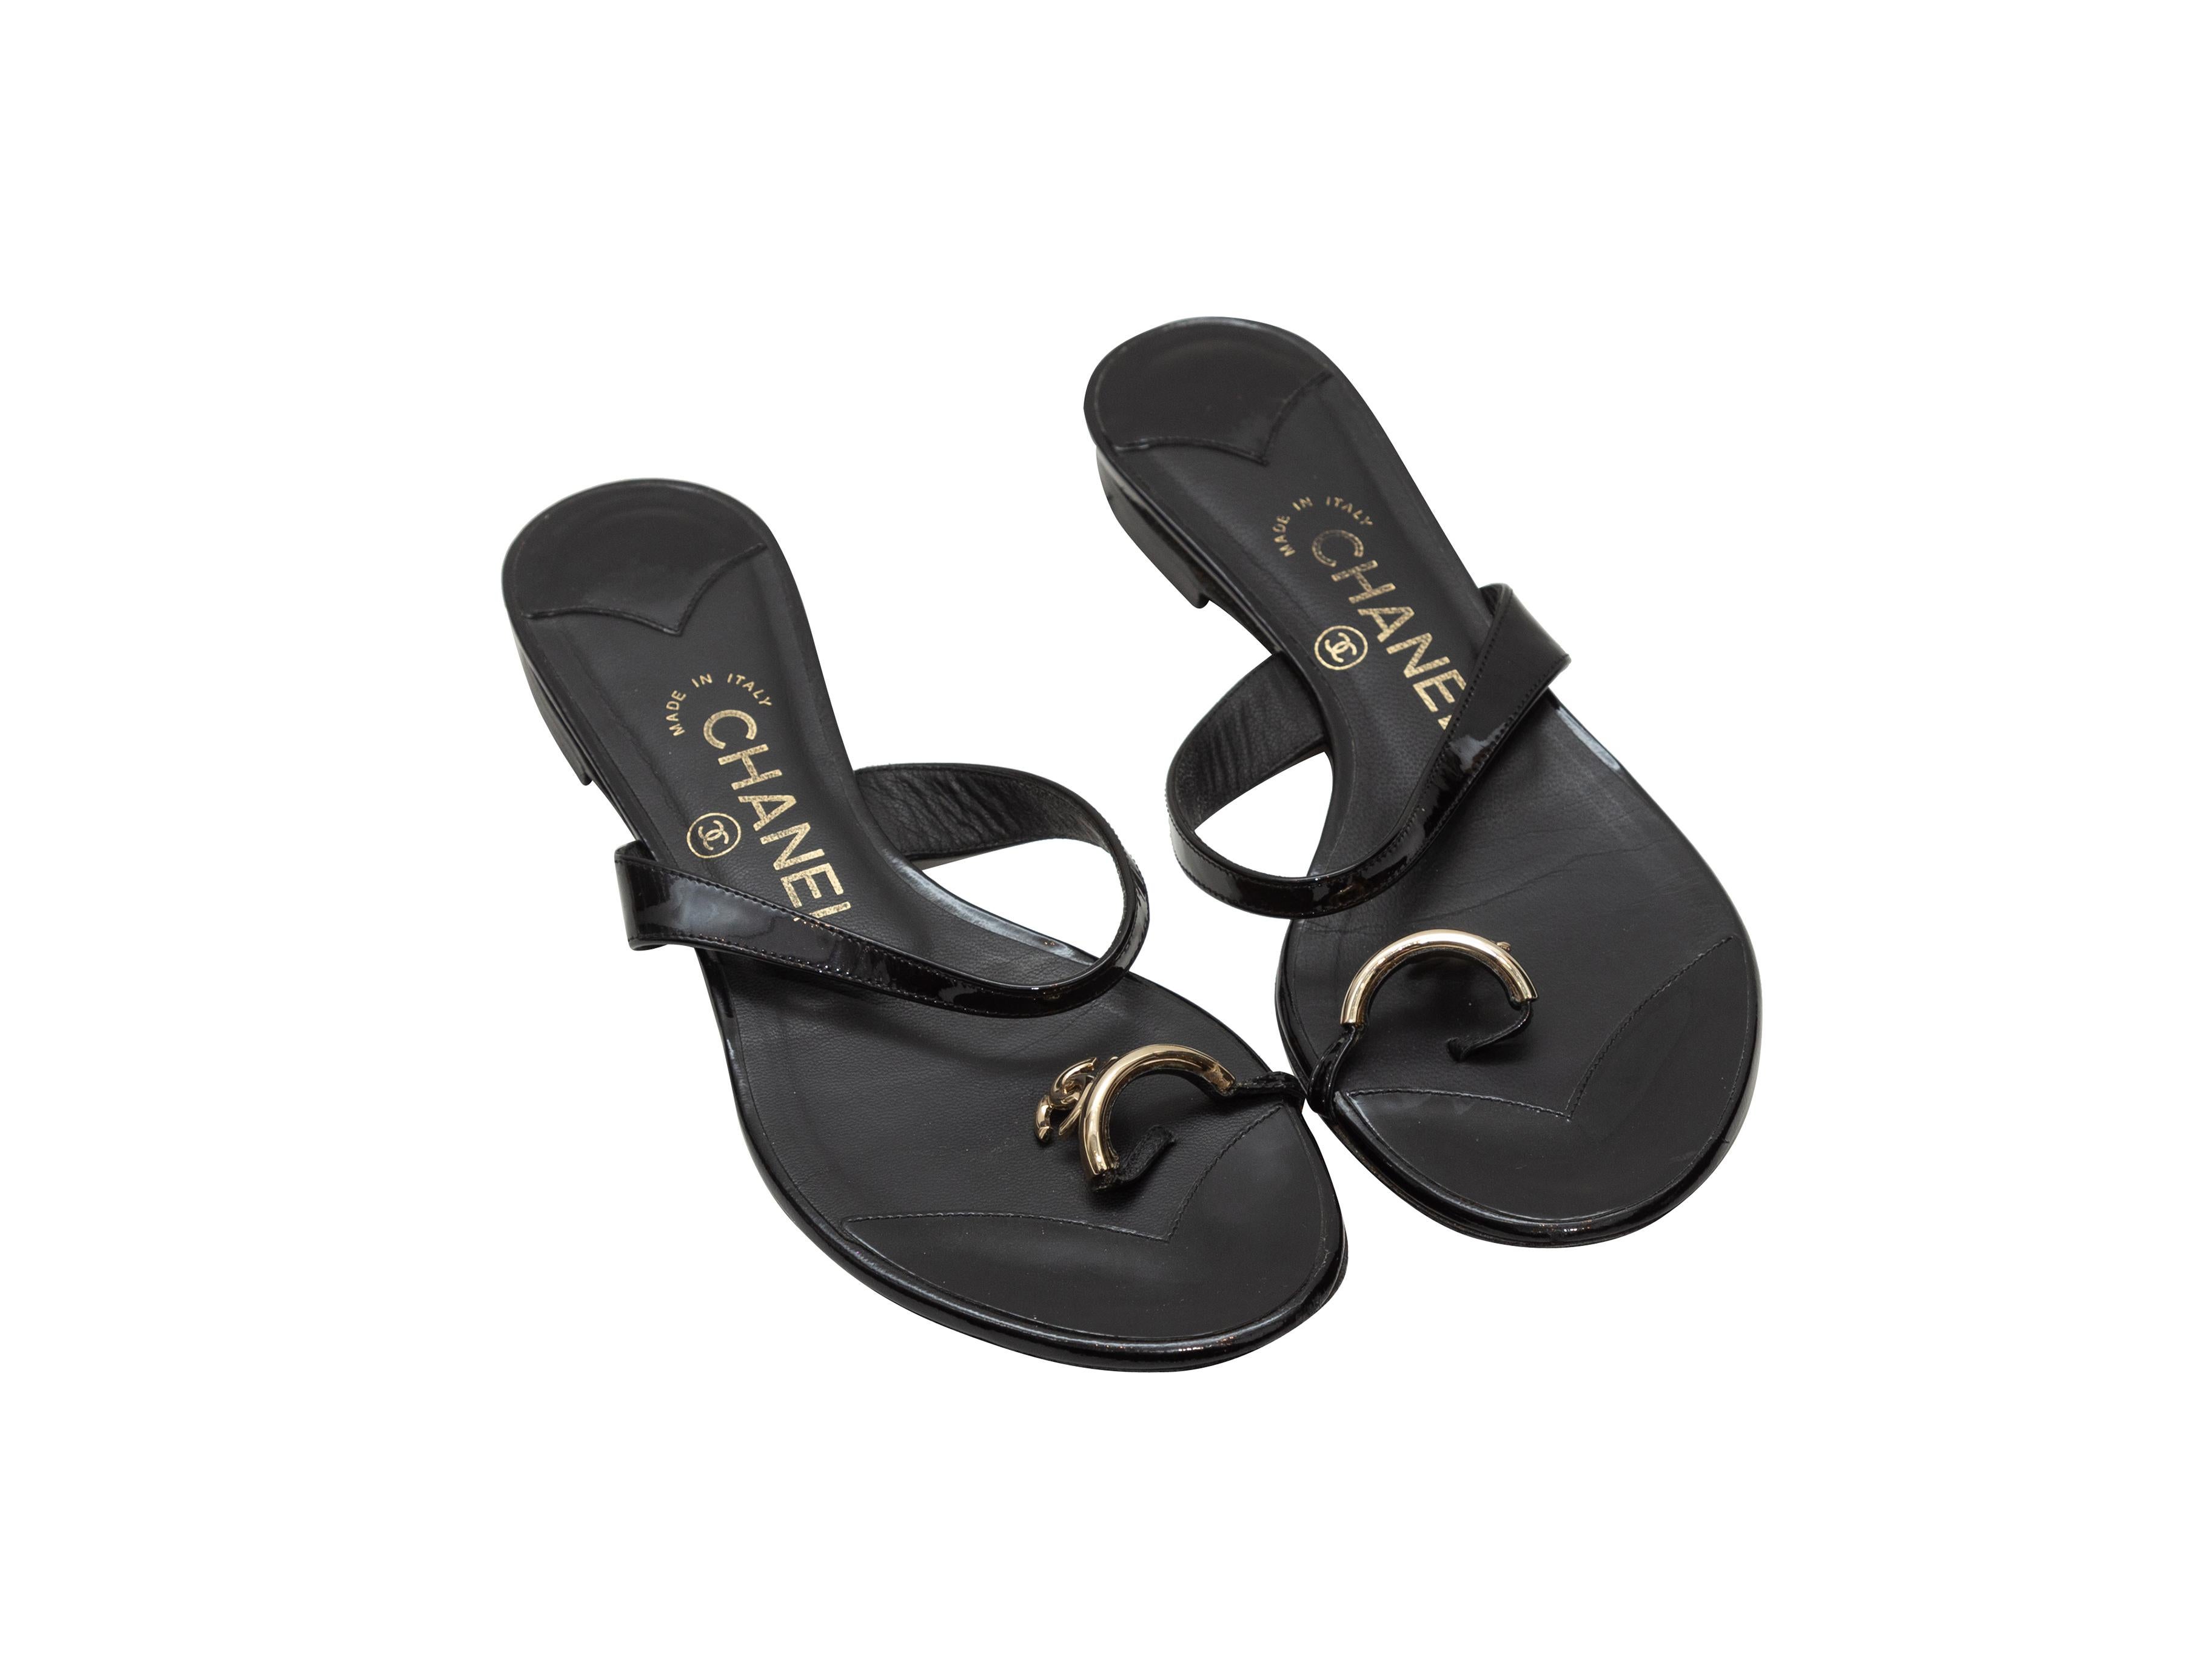 Product details: Black patent leather sandals by Chanel. Silver-tone CC adornments at toes. Designer size 36. 0.75